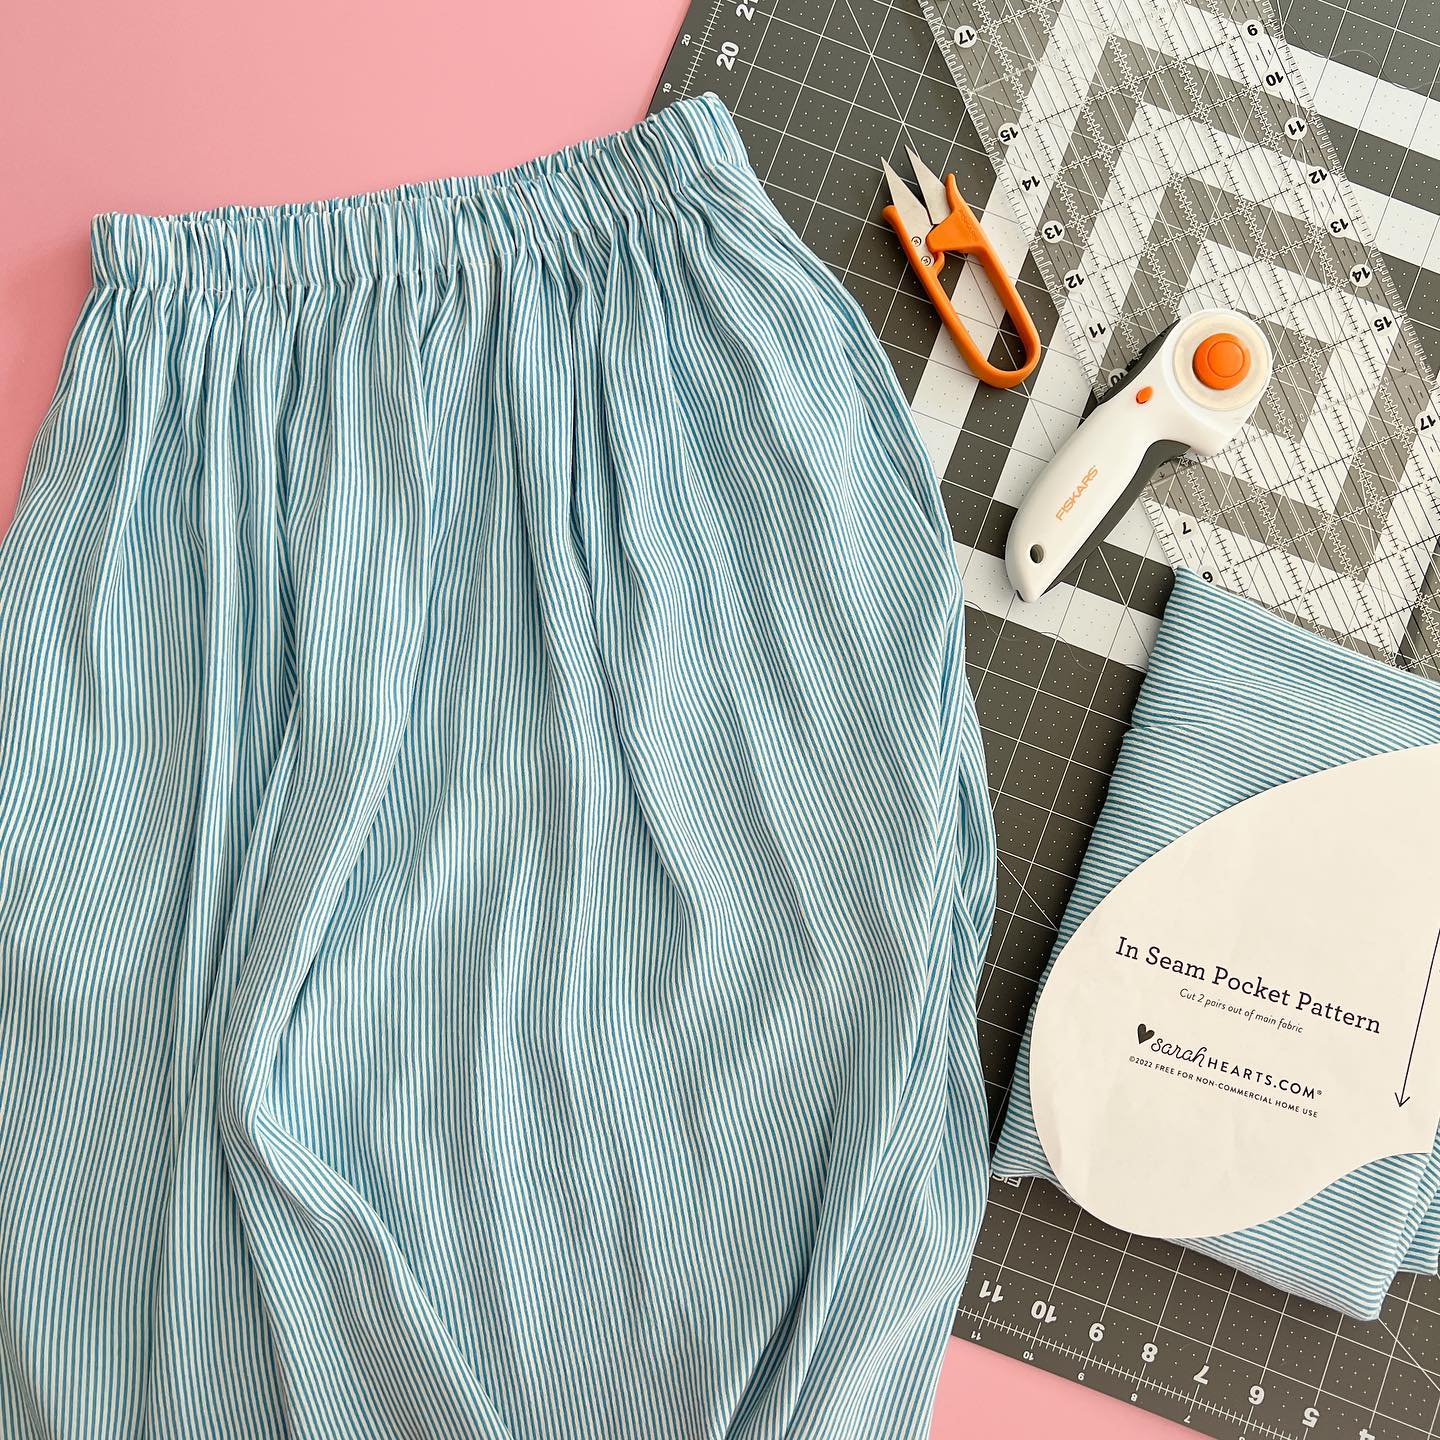 LIVE SEWING WORKSHOP! Have you ever wanted to learn how to sew in-seam pockets into a skirt/dress/top? And what exactly is the difference between all the different types of elastic available? I’m going to show you—I’ve teamed up with @fiskars for my next live @michaelsstores class!

In this $10 class you will learn how to sew an elastic waist skirt with in-seam pockets. And after signing up you will be emailed the pocket pattern I created just for you Plus we are going to get technical and talk all about different seam finishes and choosing the best elastic for your project.

Join me next Friday evening, June 3rd at 7pm ET and let’s create something together! Link to sign up in stories and on michaels.com

#MakeItWithMichaels #fiskars #sarahheartssews